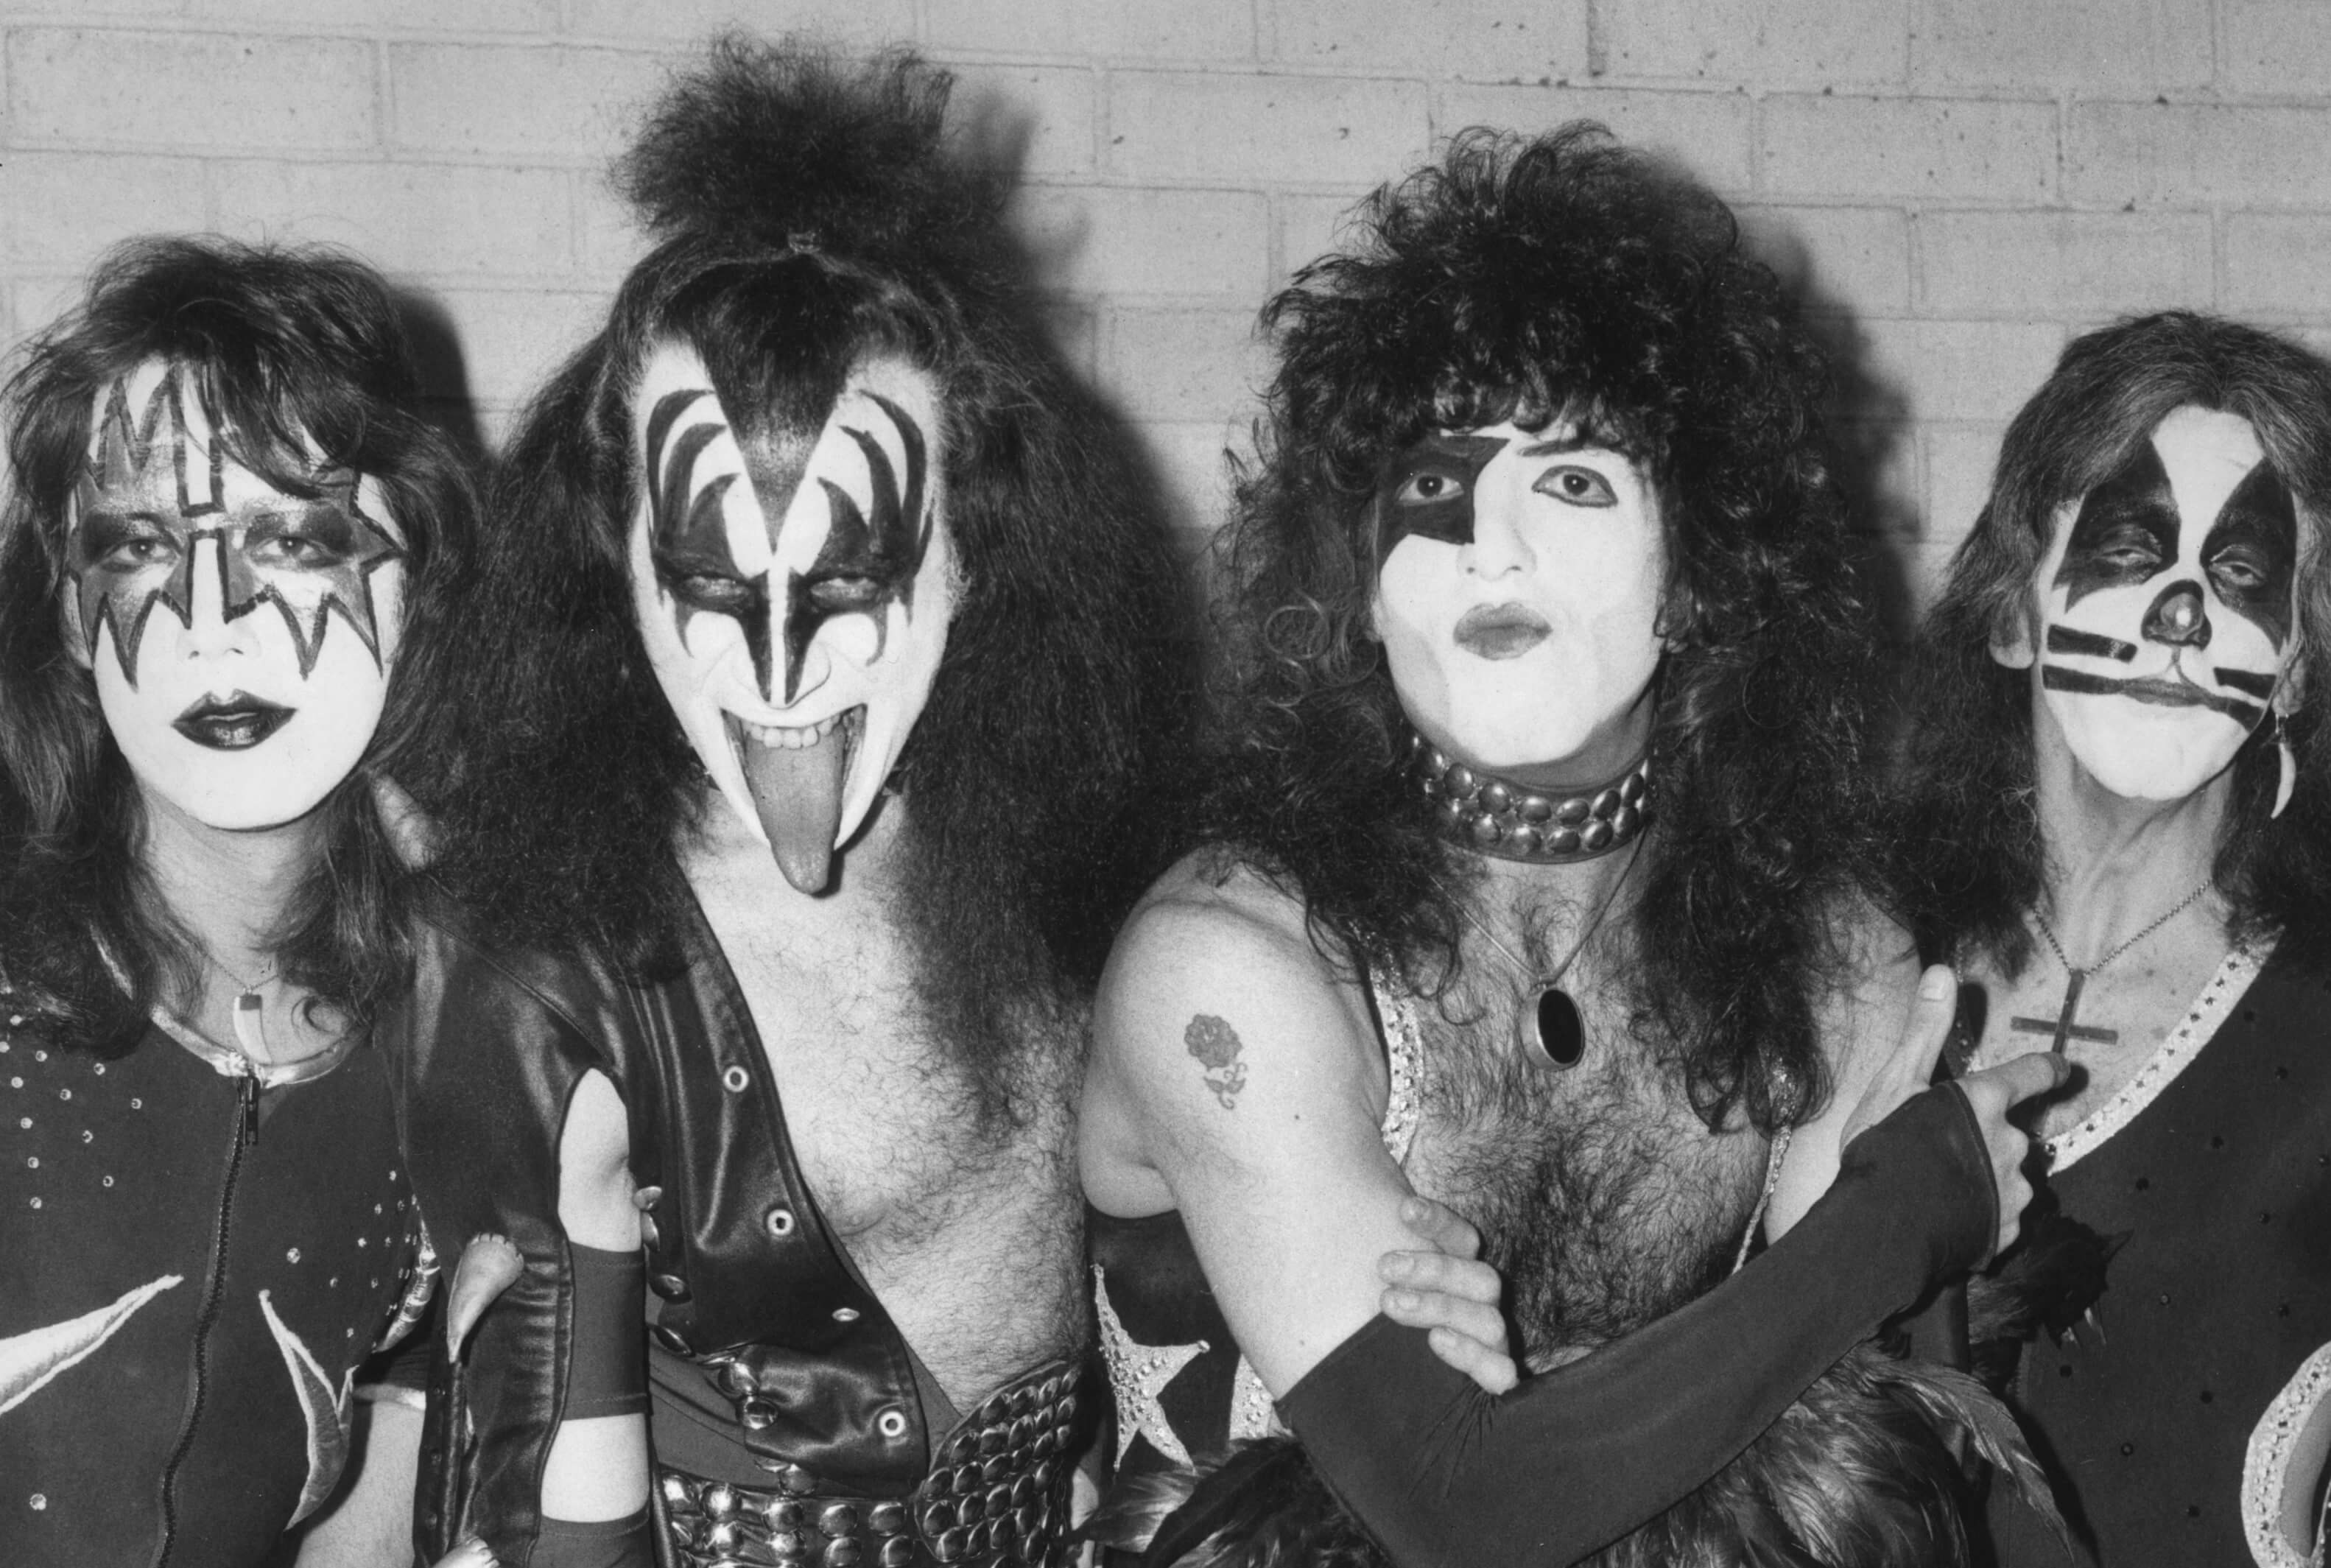 Kiss in makeup during the "I Was Made for Lovin' You" era